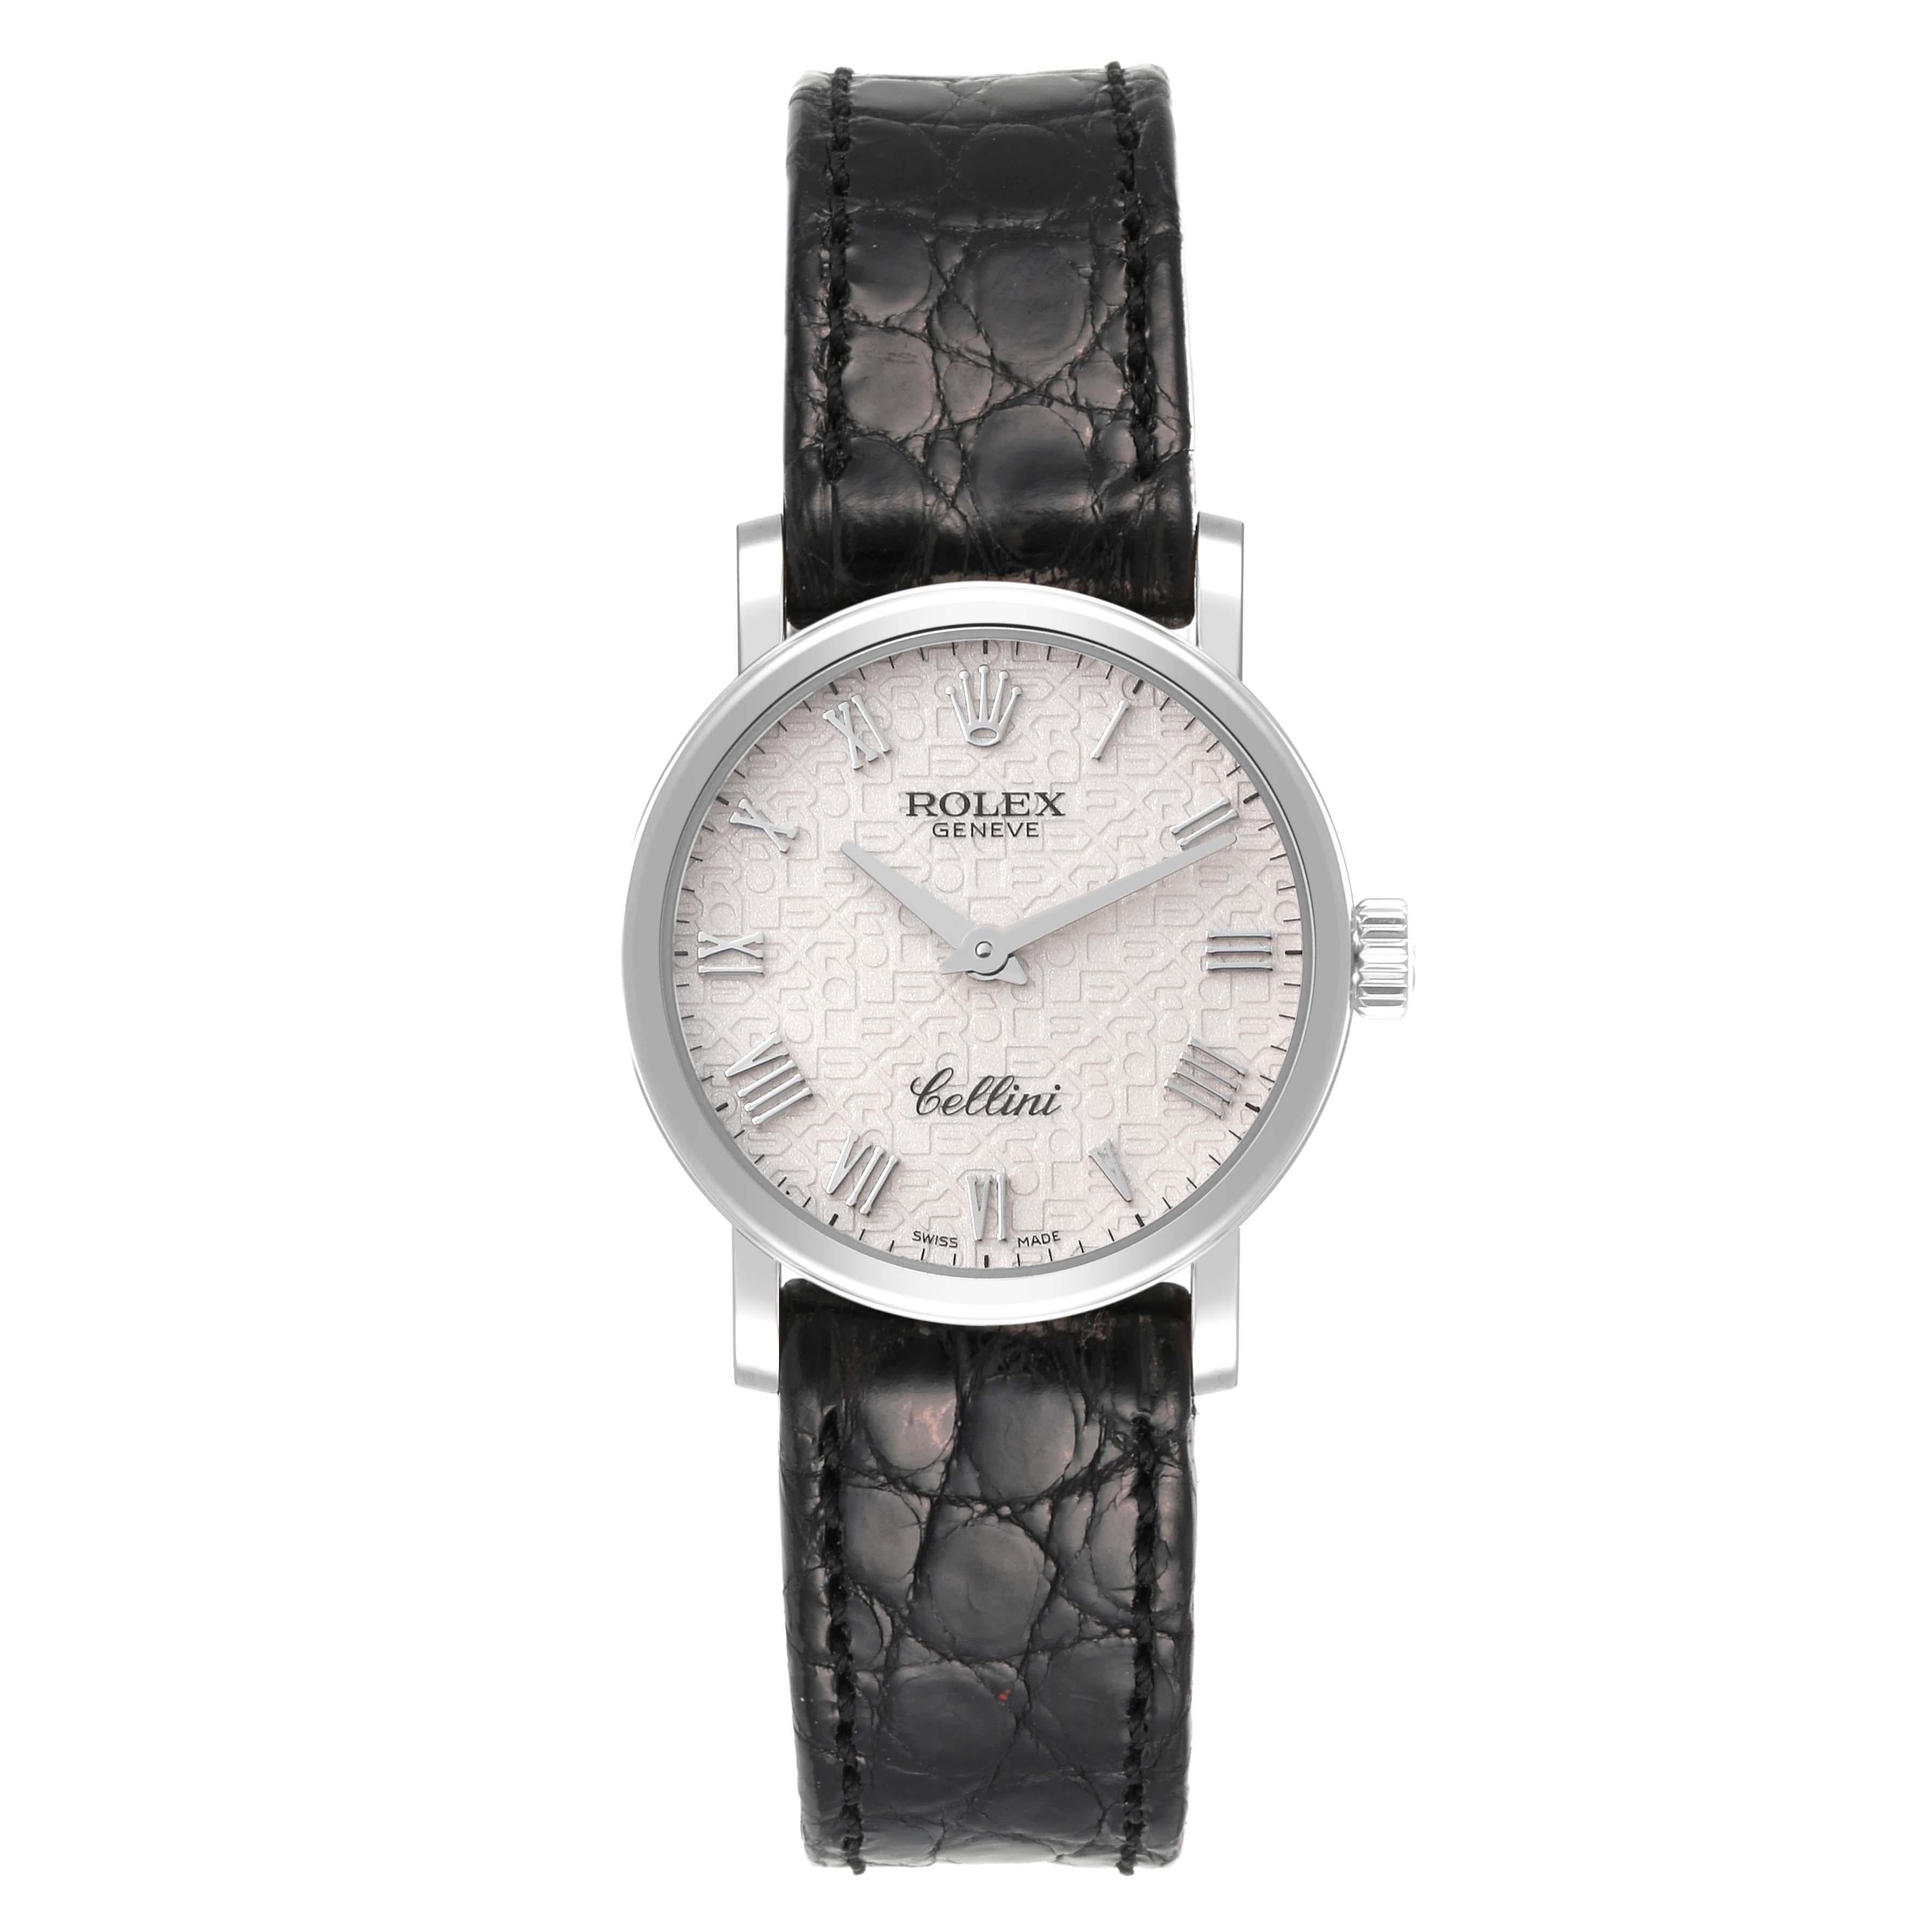 Rolex Cellini Classic White Gold Anniversary Dial Ladies Watch 6110 Unworn. Quartz movement. 18k white gold slim case 26.0 mm in diameter. . Scratch resistant sapphire crystal. Flat profile. Ivory jubilee anniversary dial with raised Roman numeral